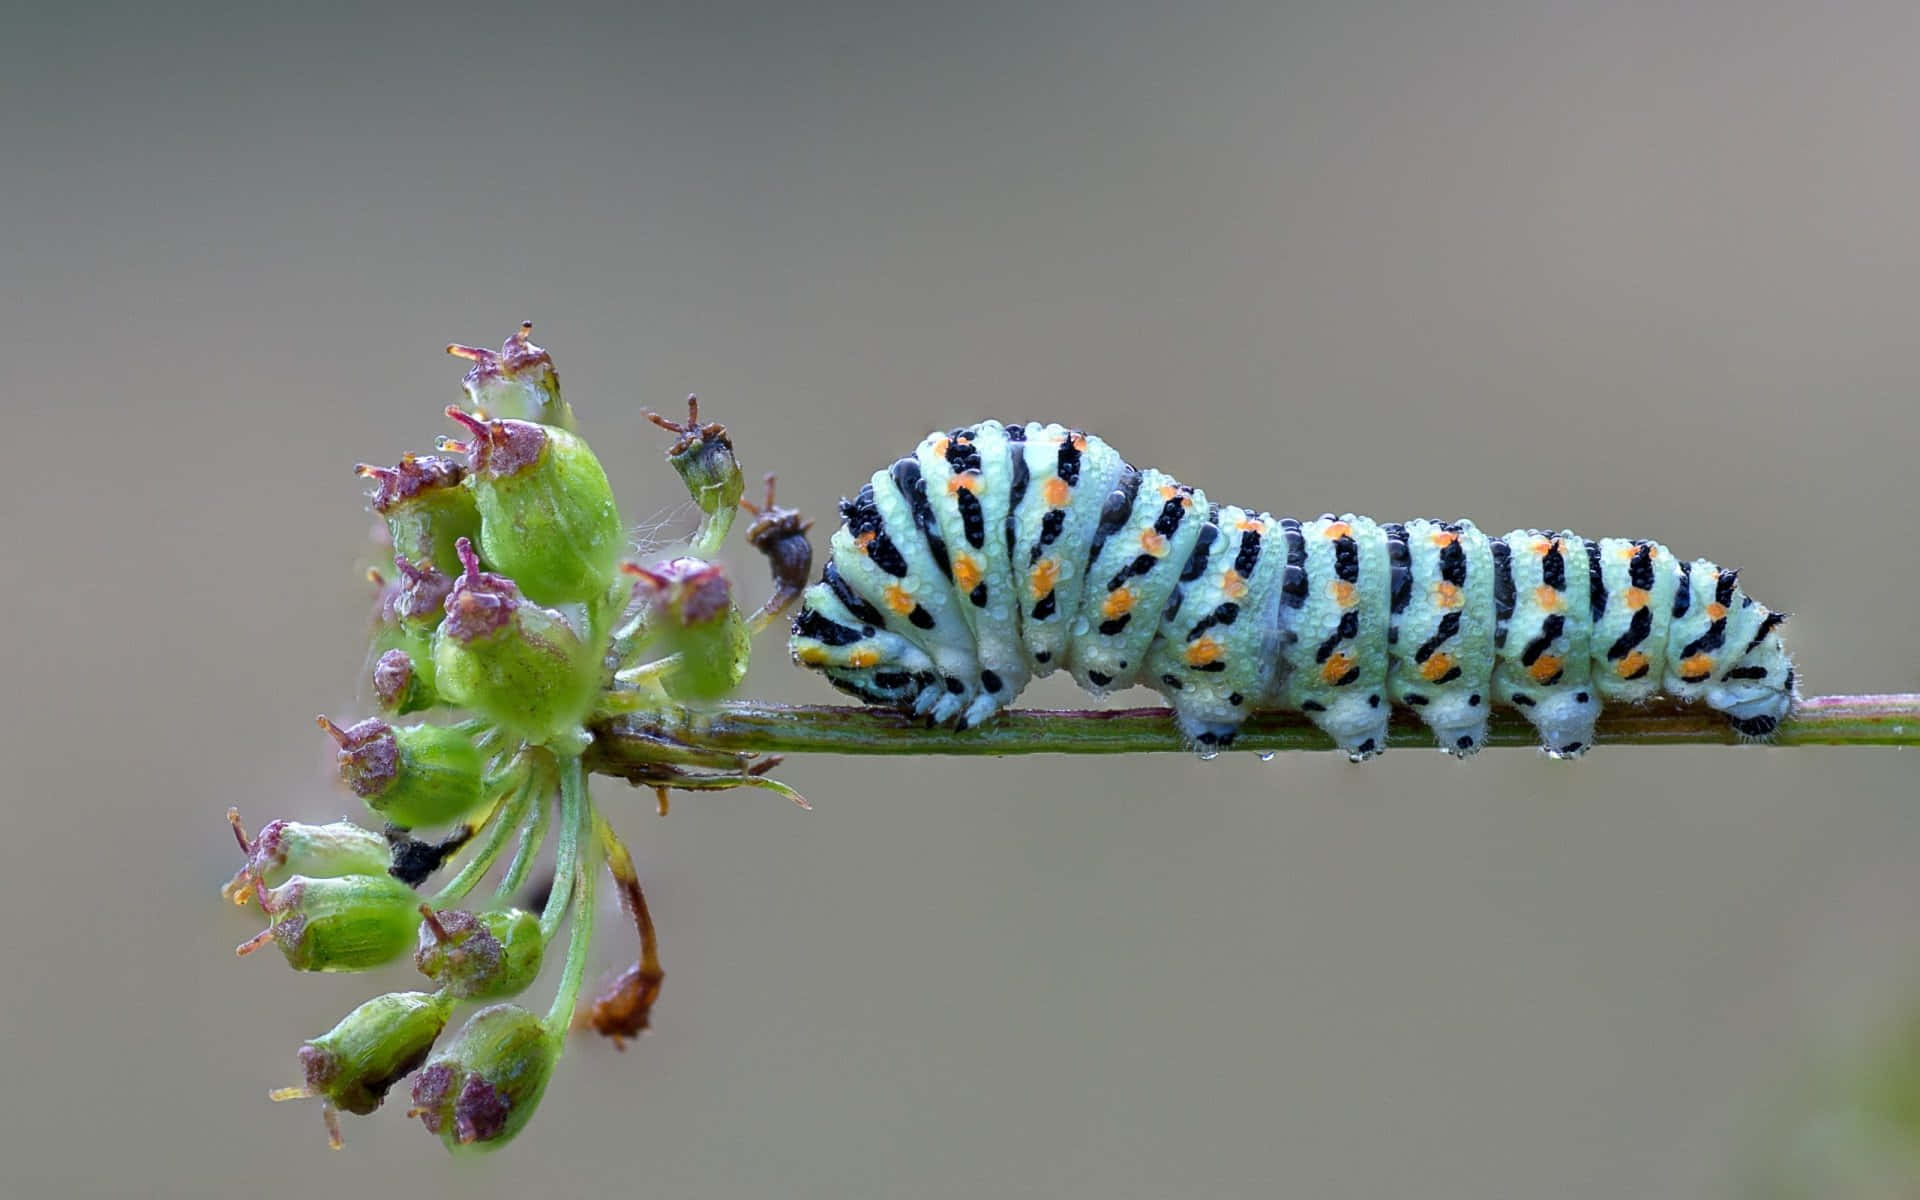 "A Close-Up of a Colorful Caterpillar Insect"